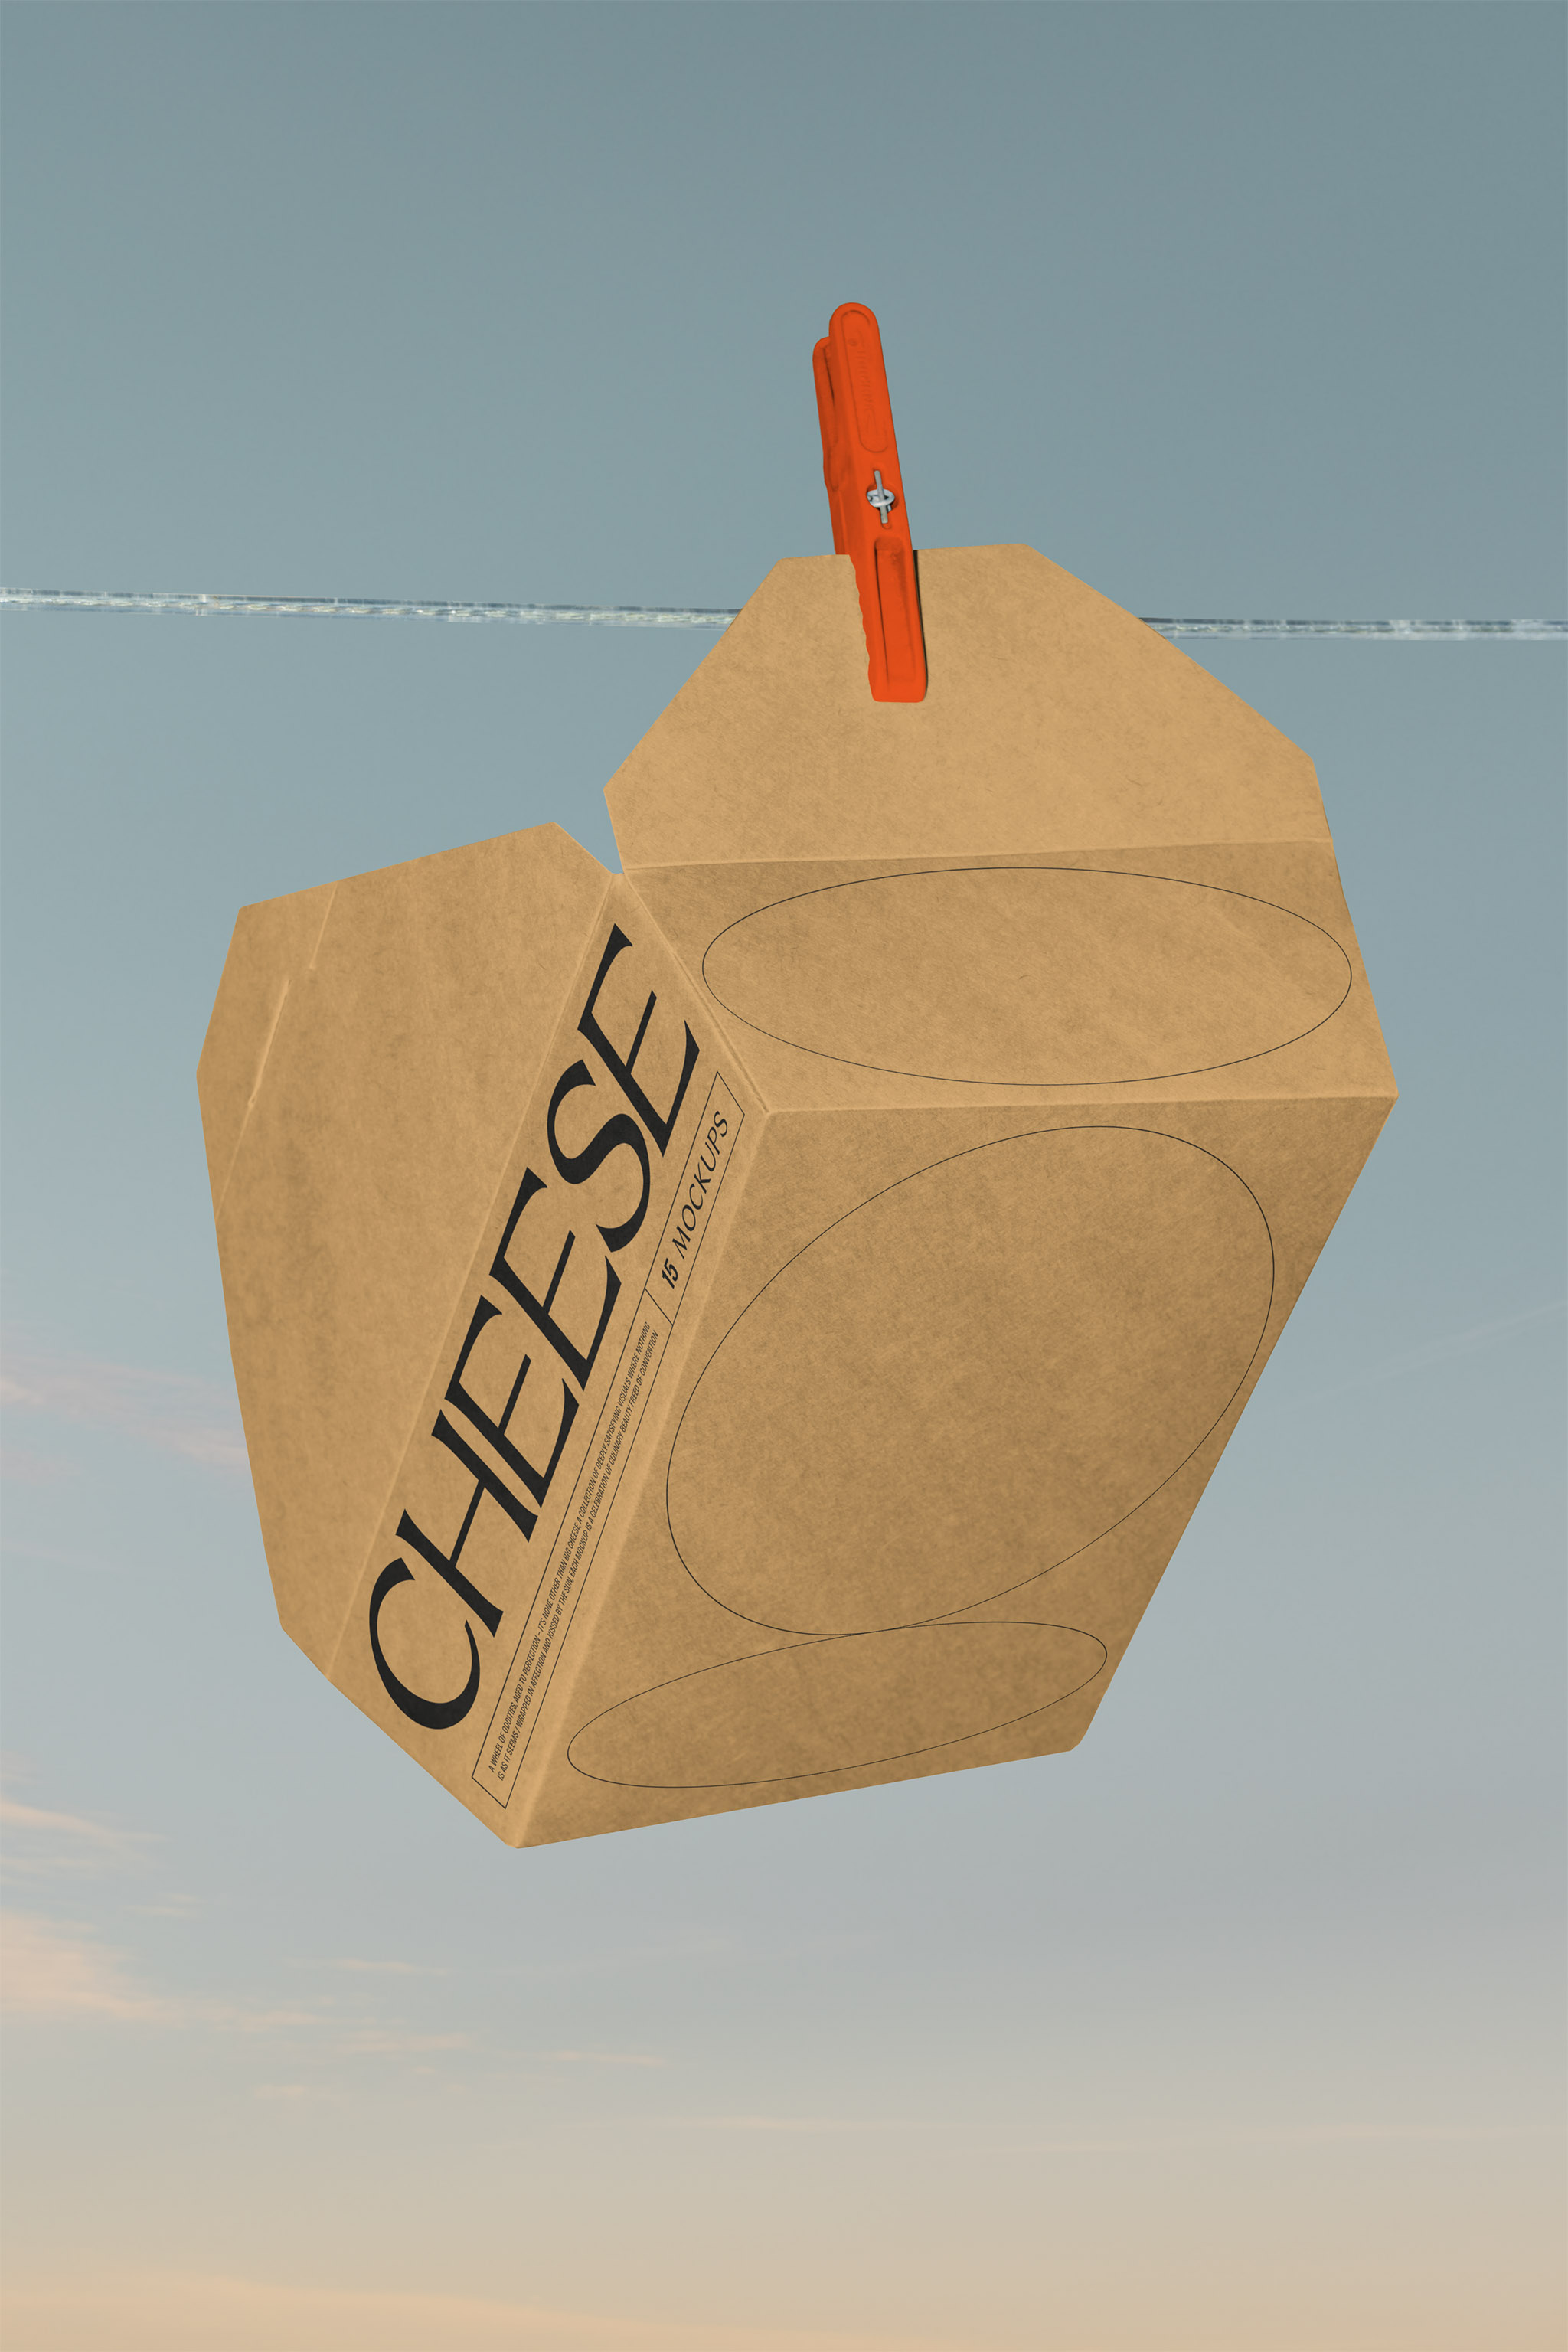 Creative conceptual photo mockup of a kraft meal box with branded food packaging design hung on a clothing line with a clothespin and set against a dusky sky, in use example.